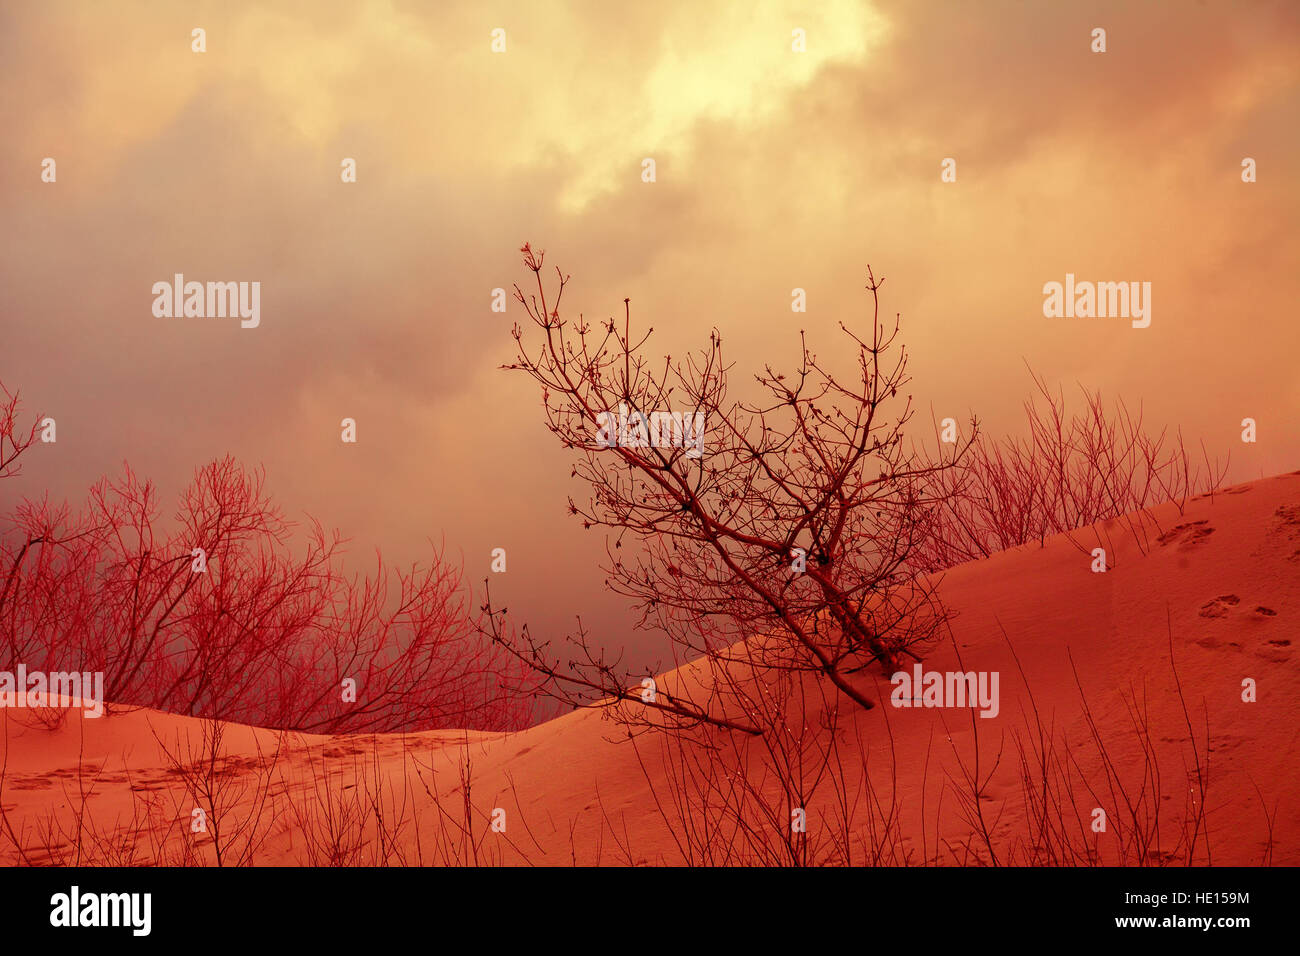 Dramatic autumn landscape with sandy dune, trees and cloudy stormy sky Stock Photo